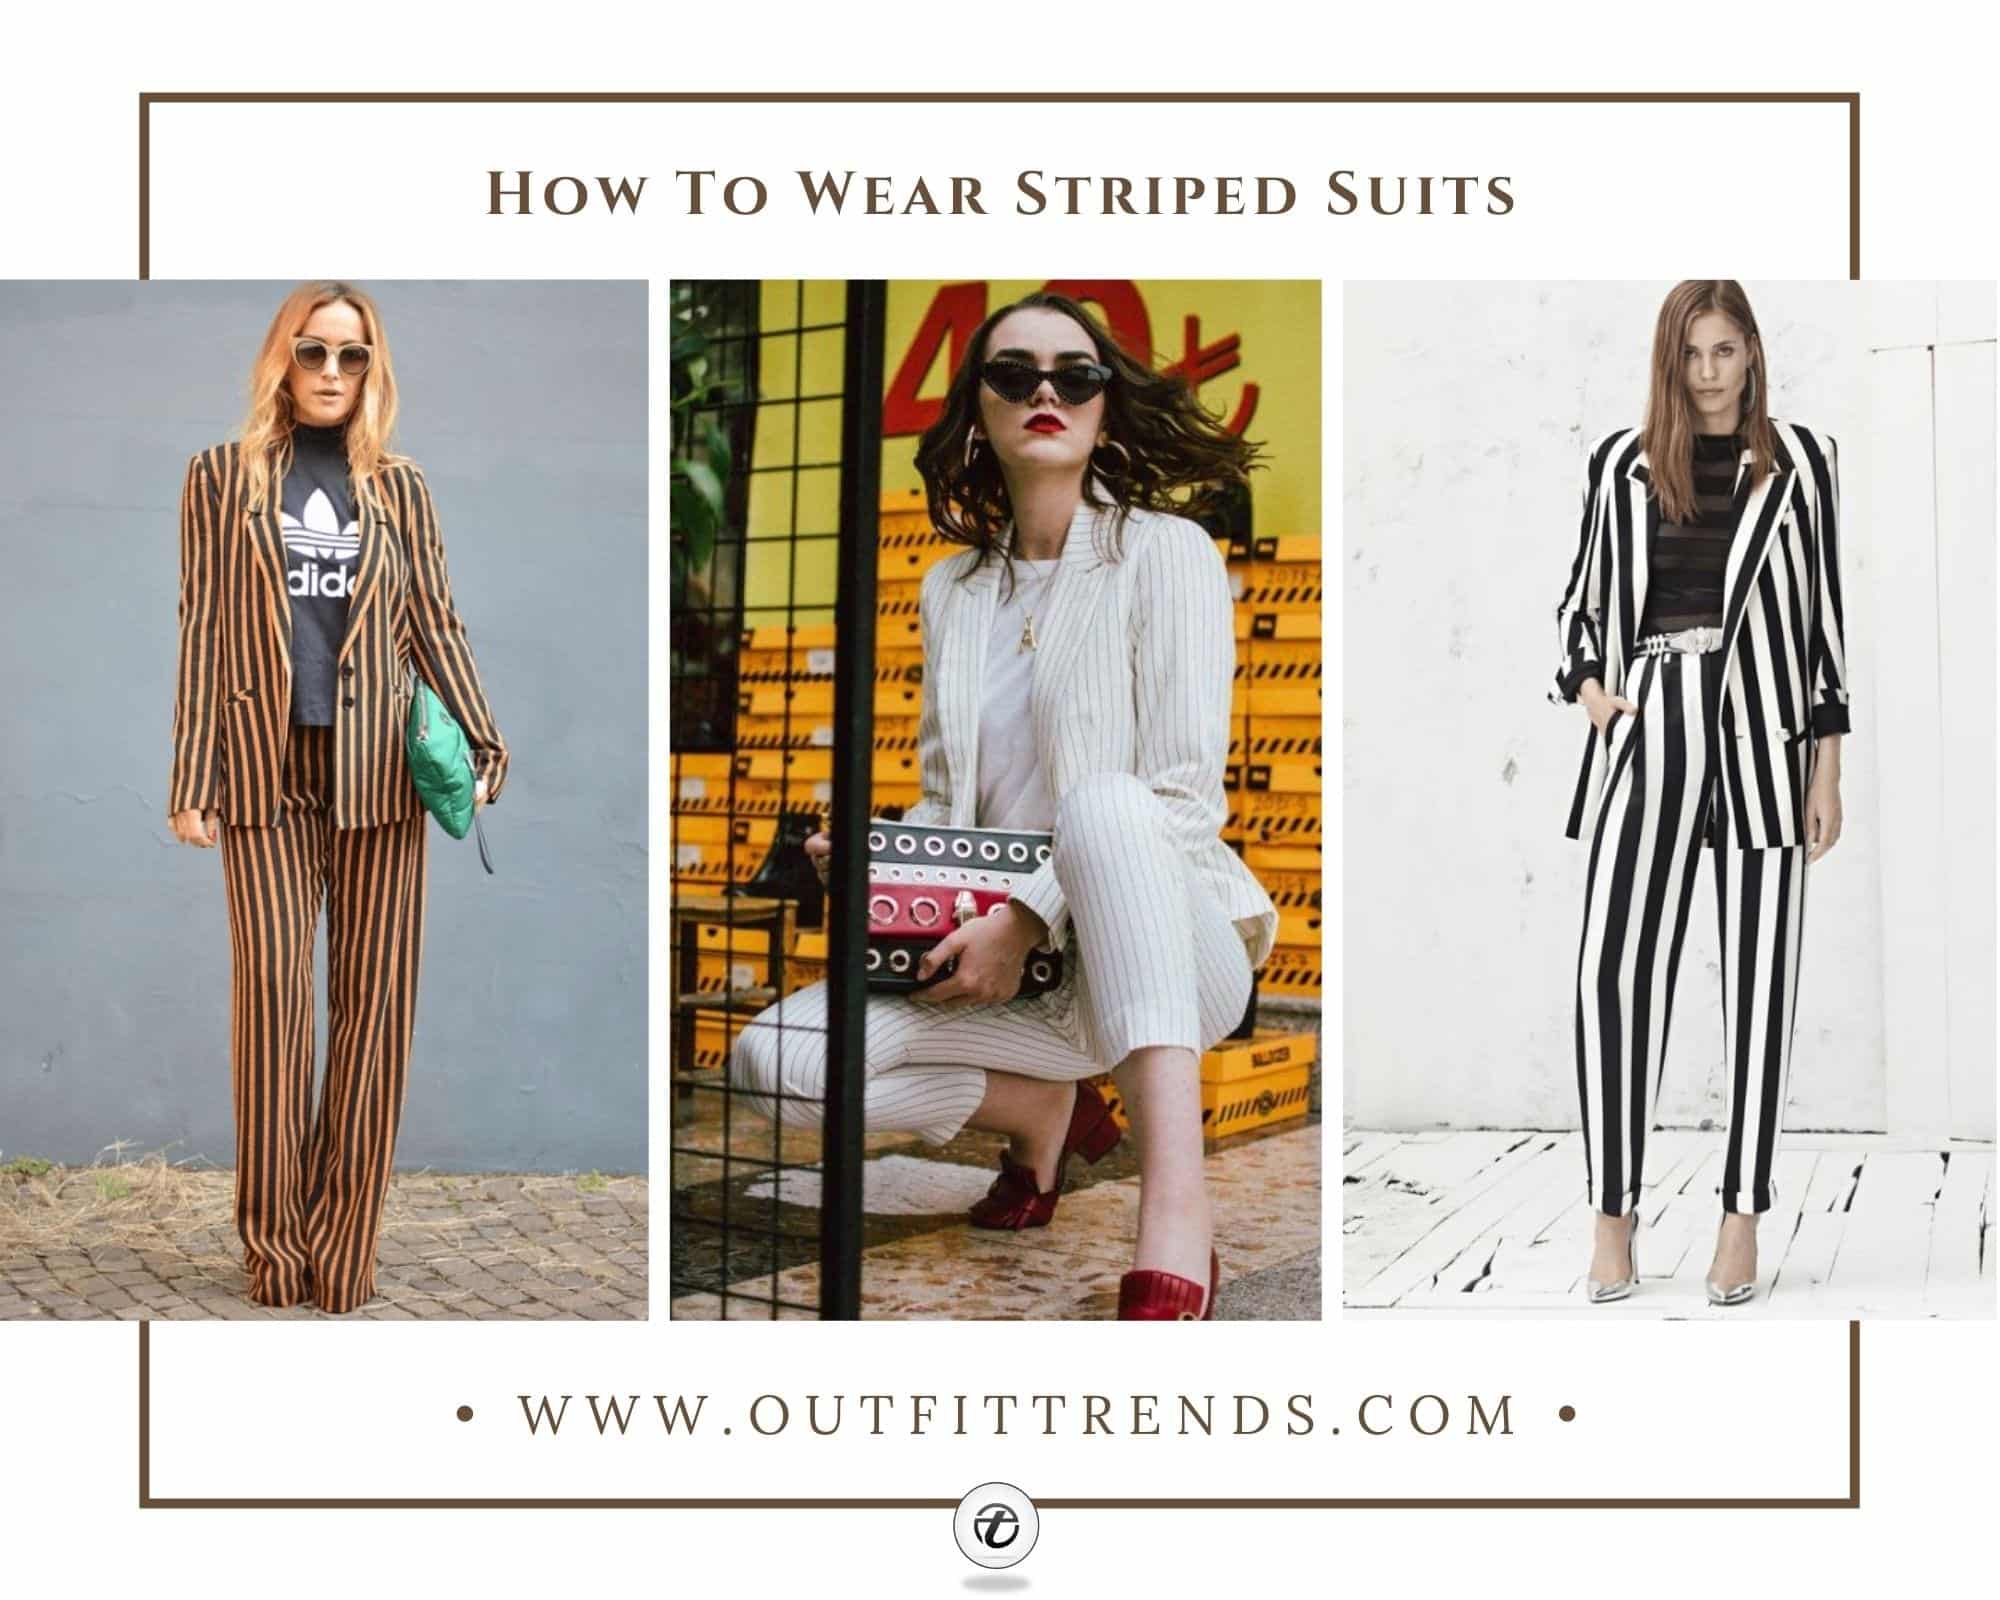 Striped Suits for Women - 17 Ways to Style a Pinstripe Suit